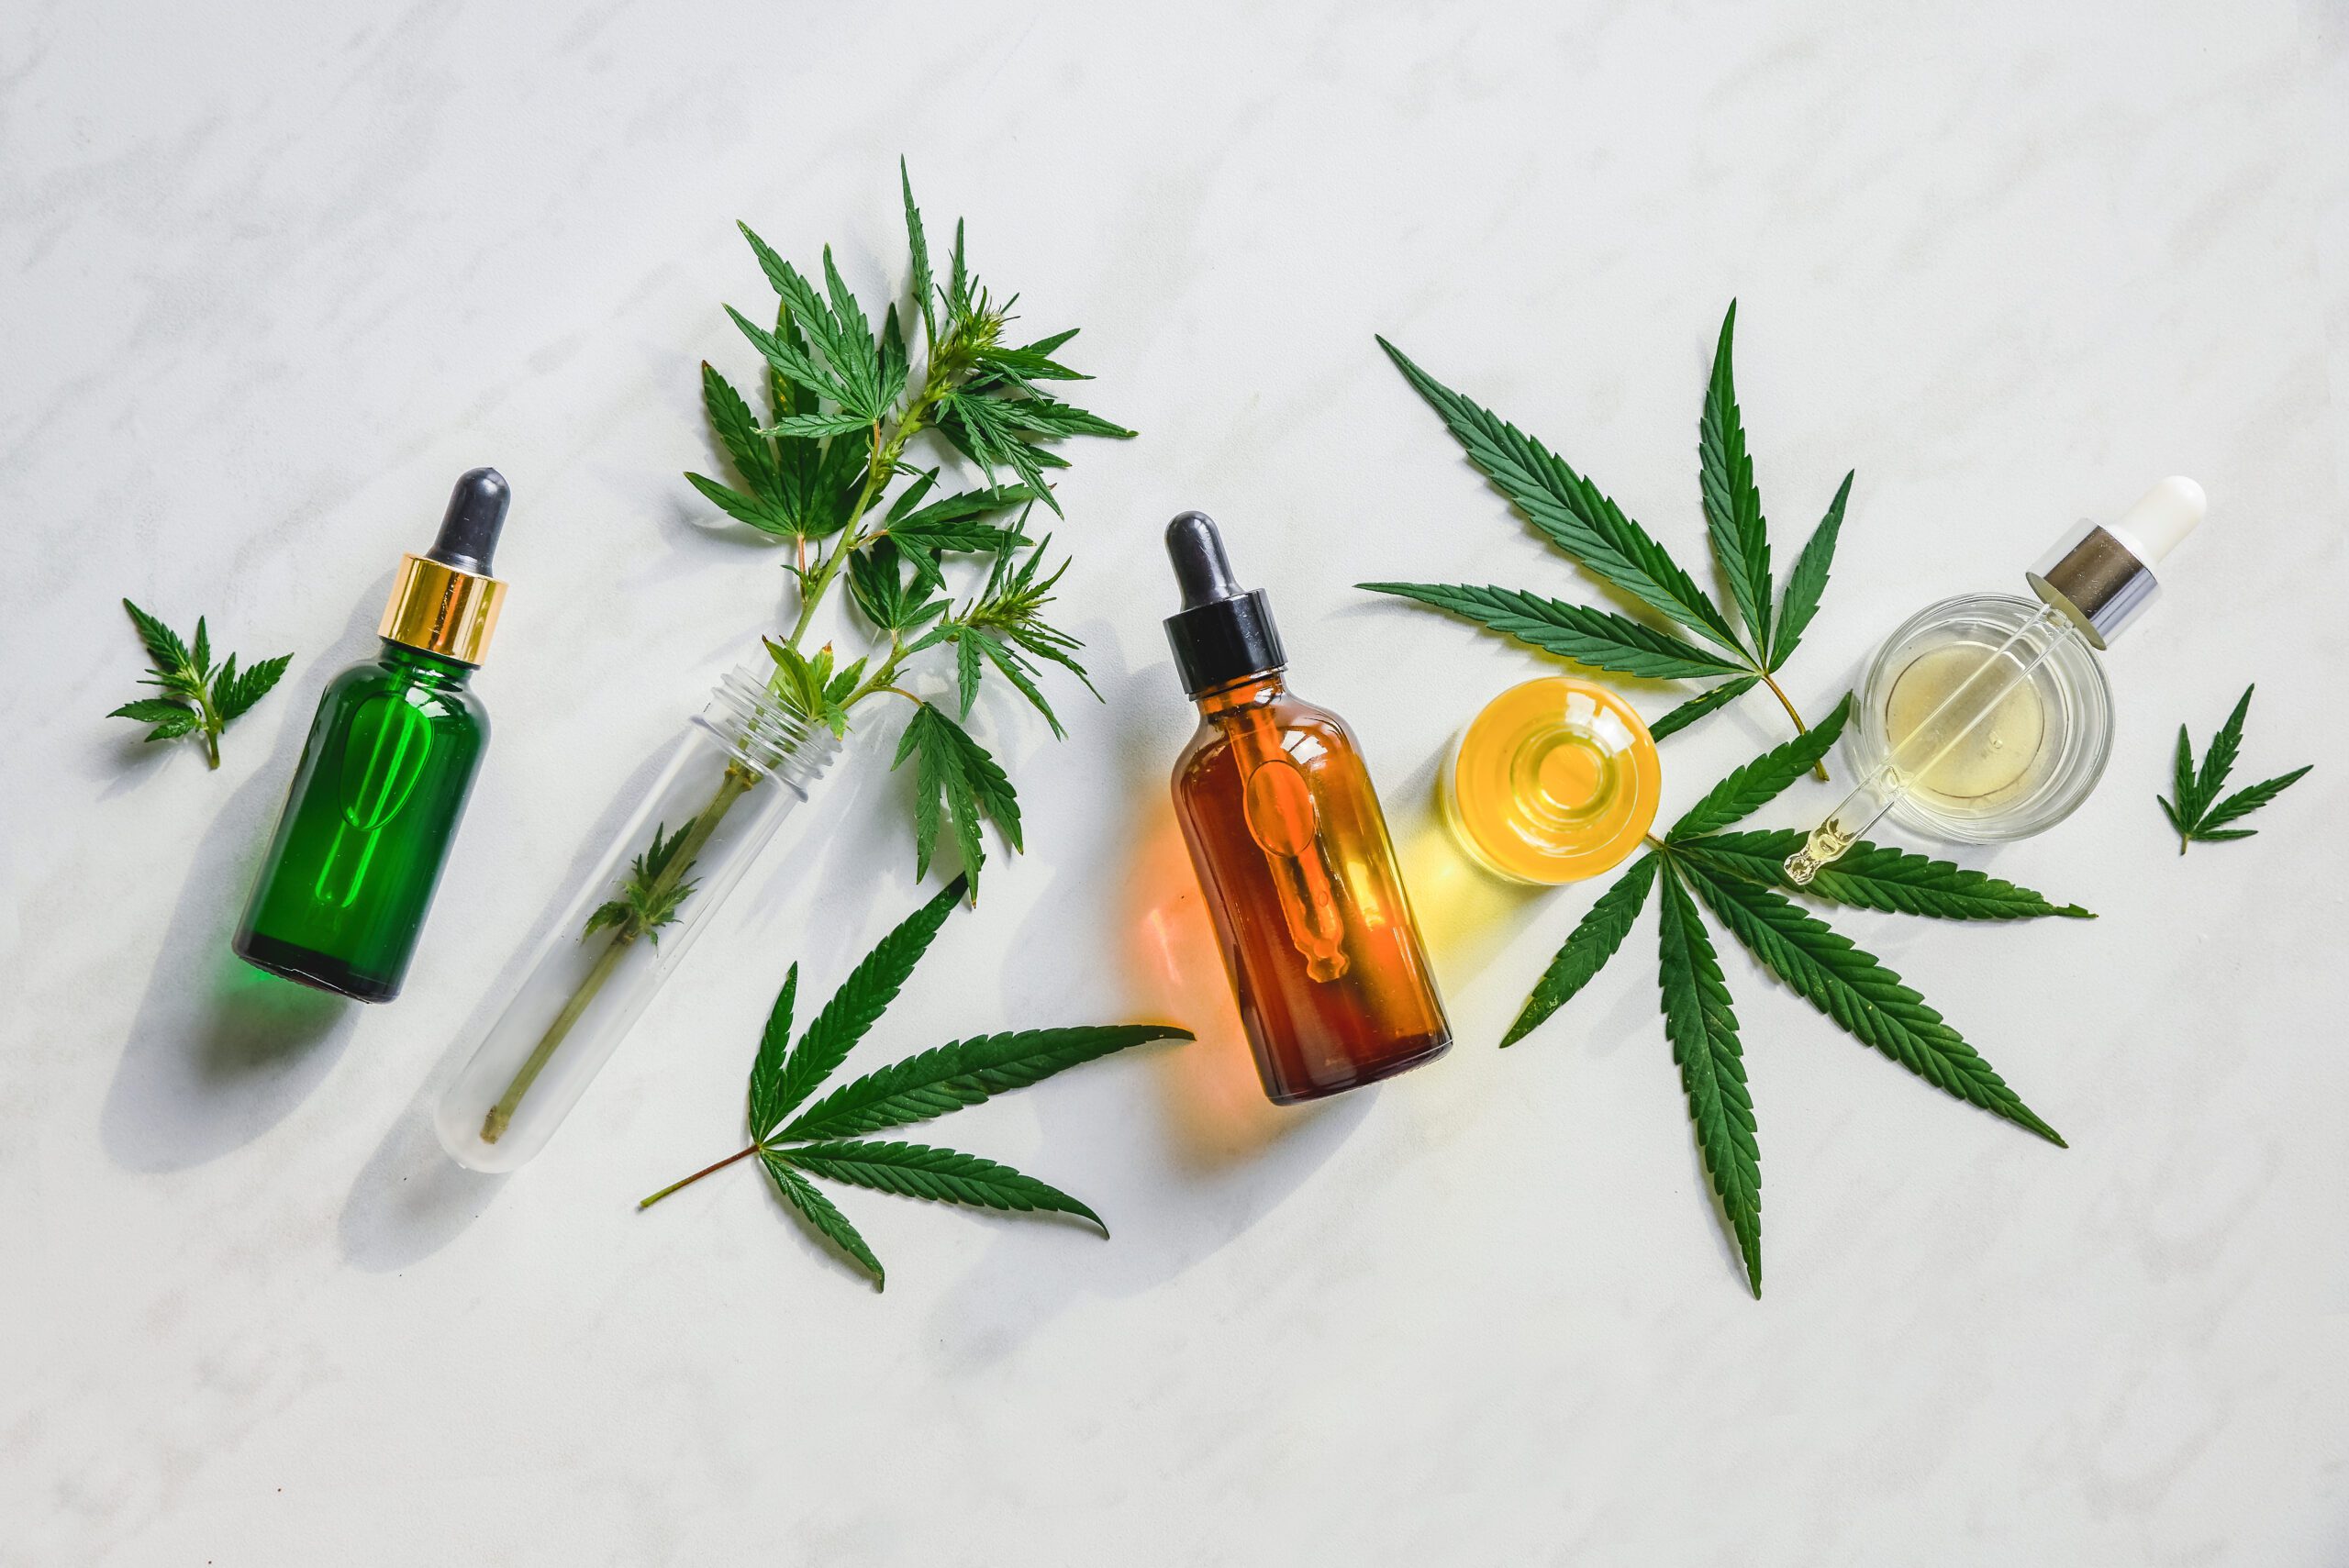 How to Use CBD Distillate Products